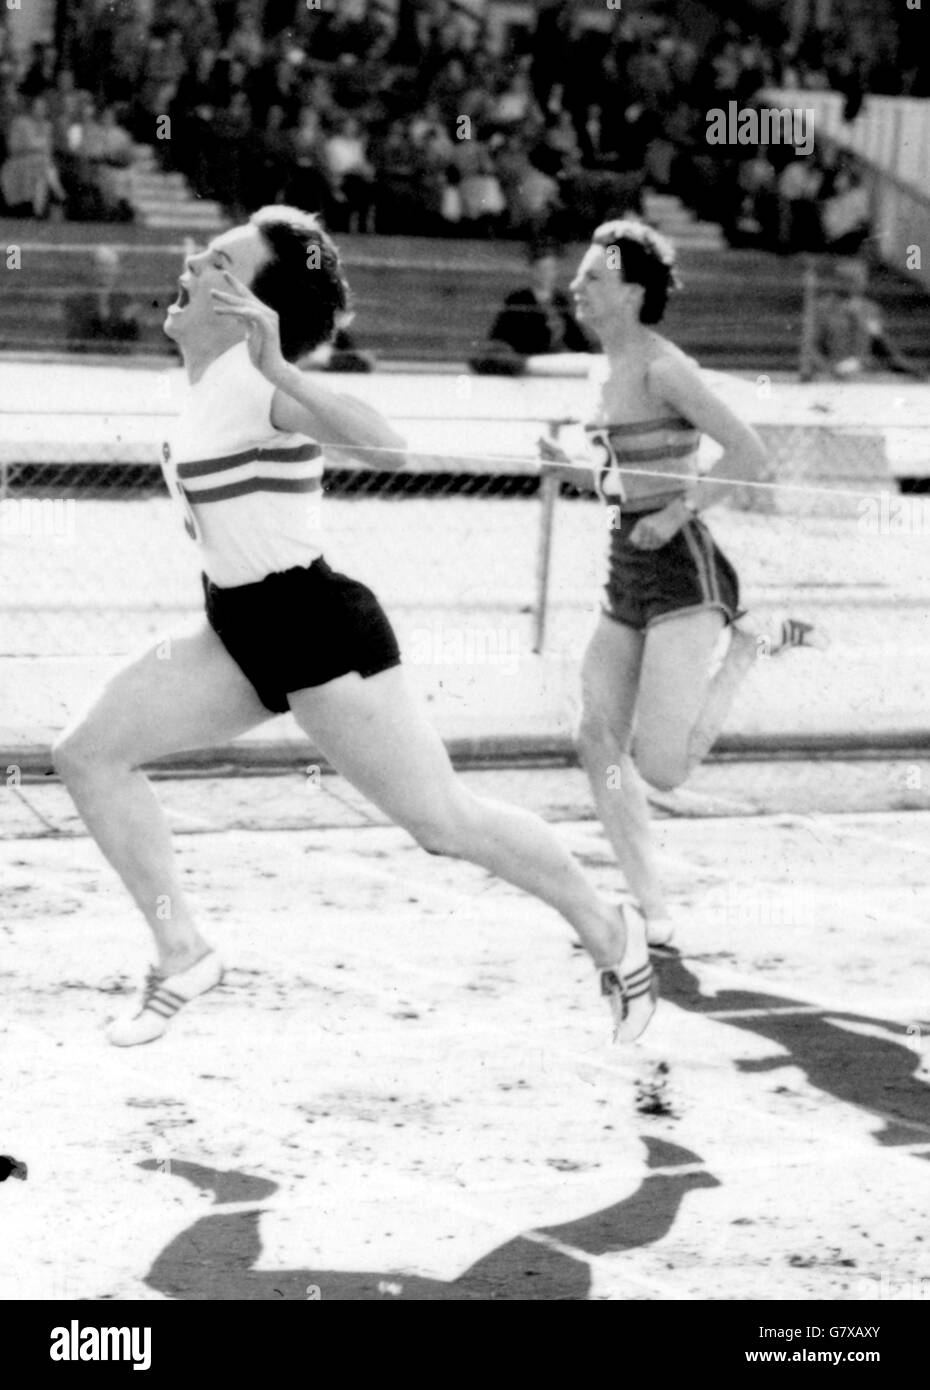 With both feet off the ground, June Paul (Sparton Ladies' A.C.) reaches the tape to win the 220 yards final in 23.8 seconds at the Women's Amateur Athletic Association Championships at White City Stadium, London. Finishing second is Jean Scrivens (Selsonia LAC) in the background. Stock Photo